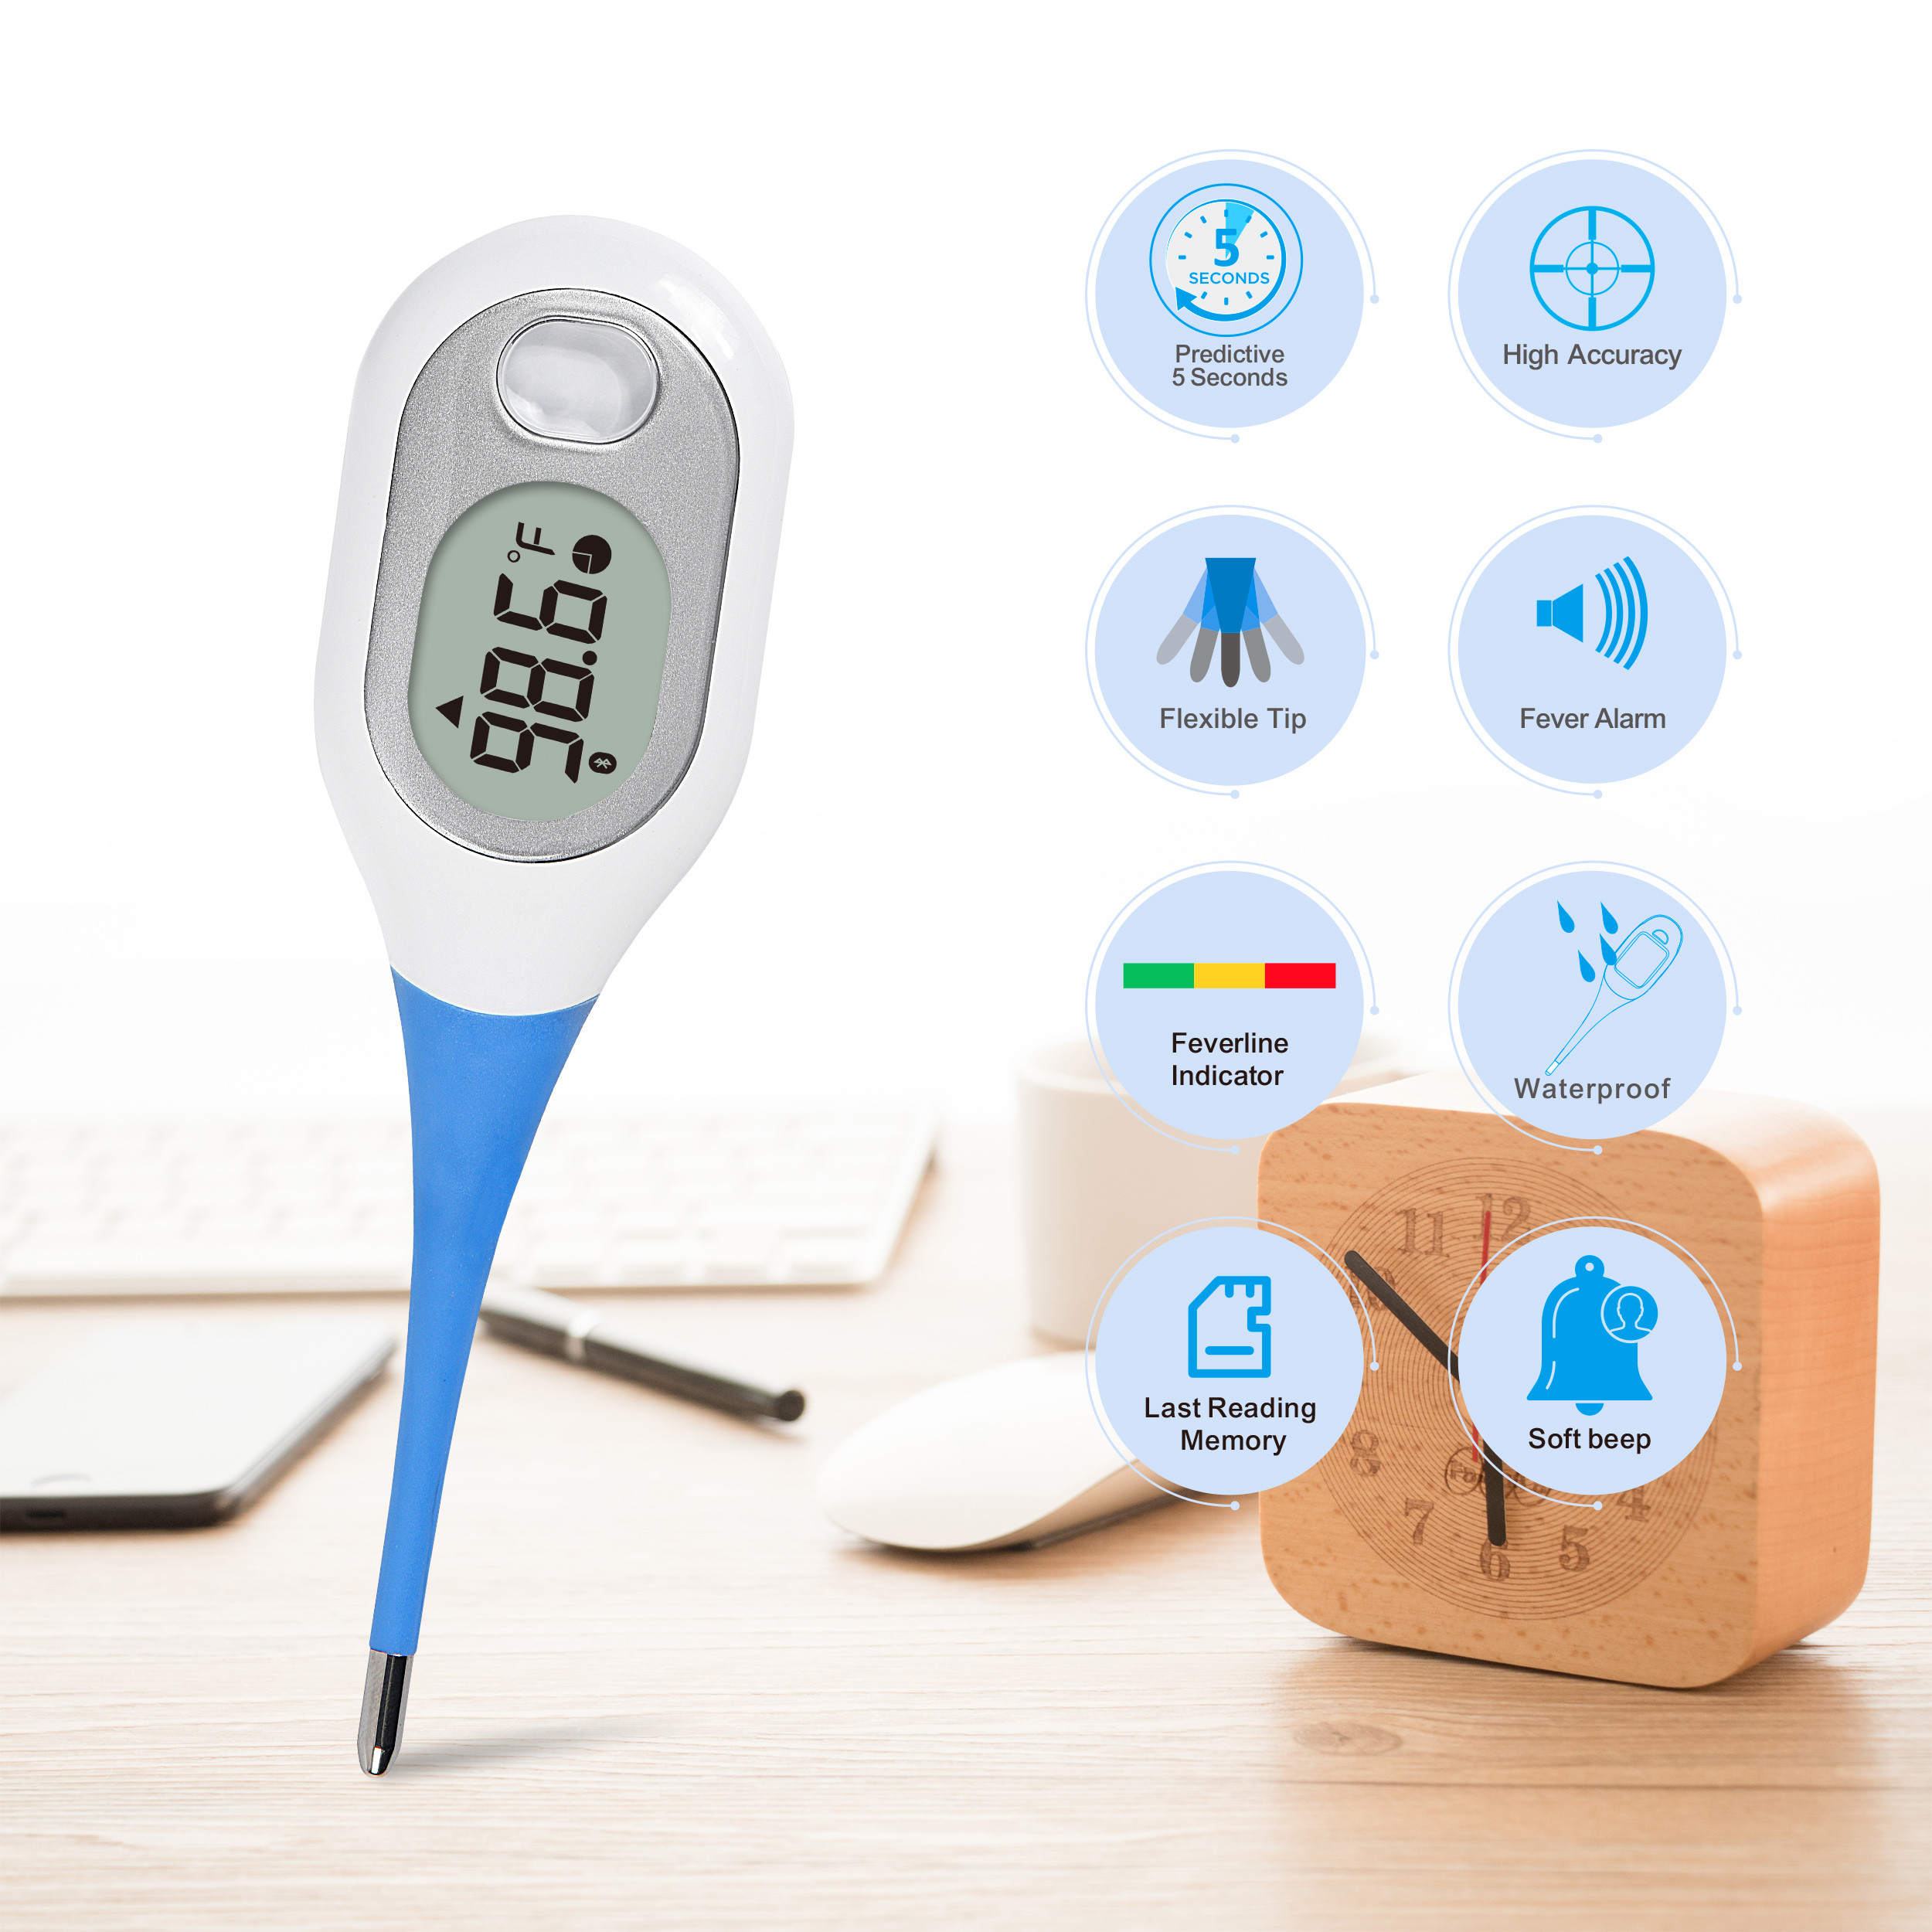 How digital thermometer works without mercury